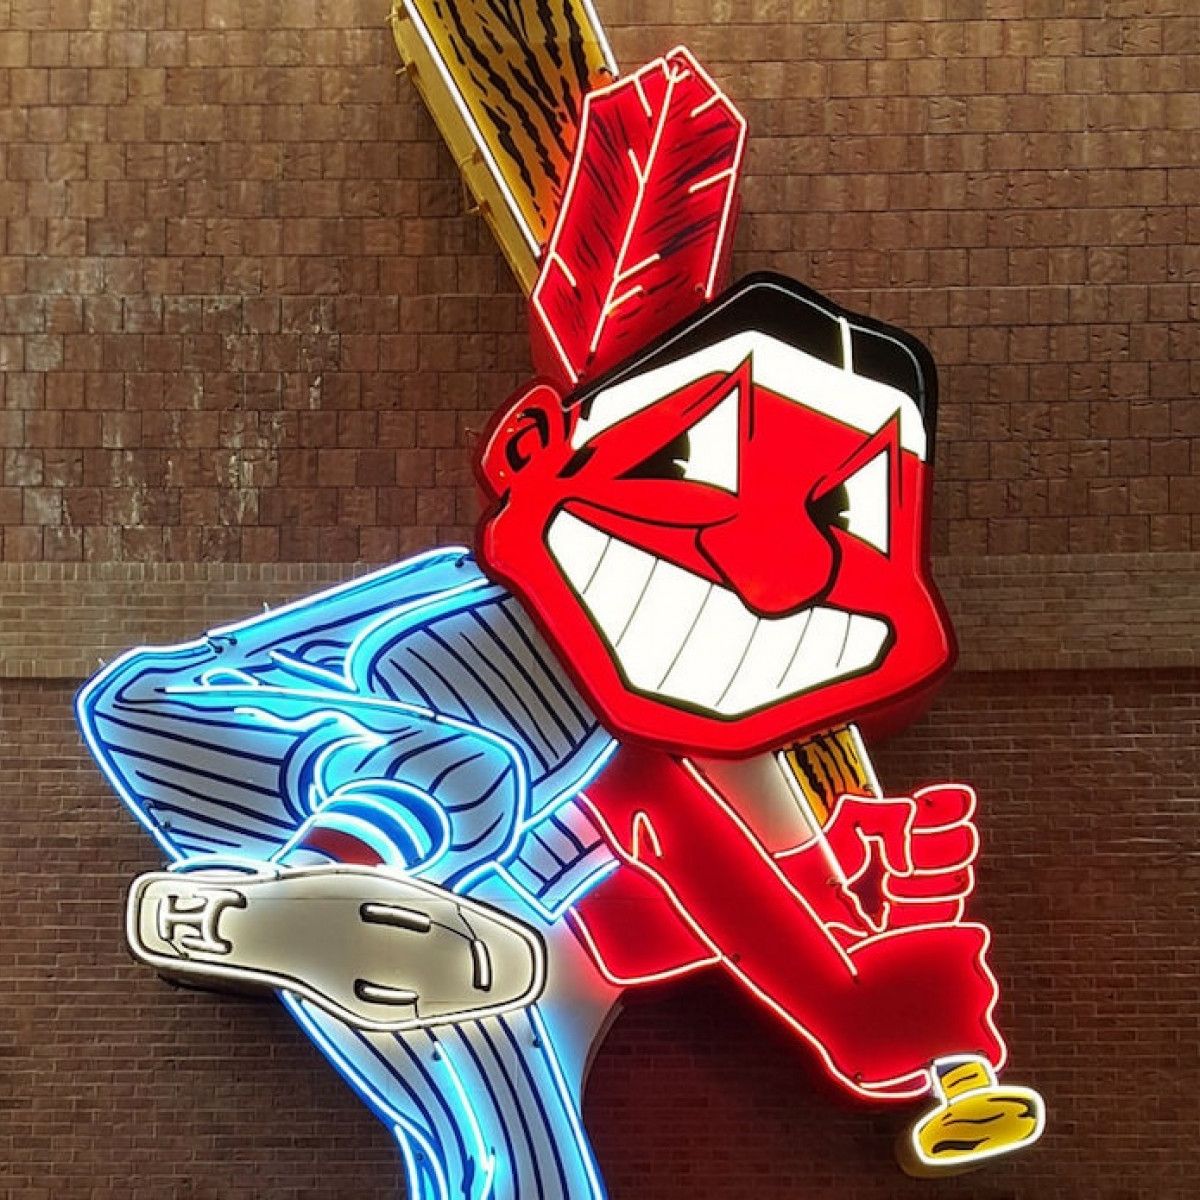 The journey of Chief Wahoo